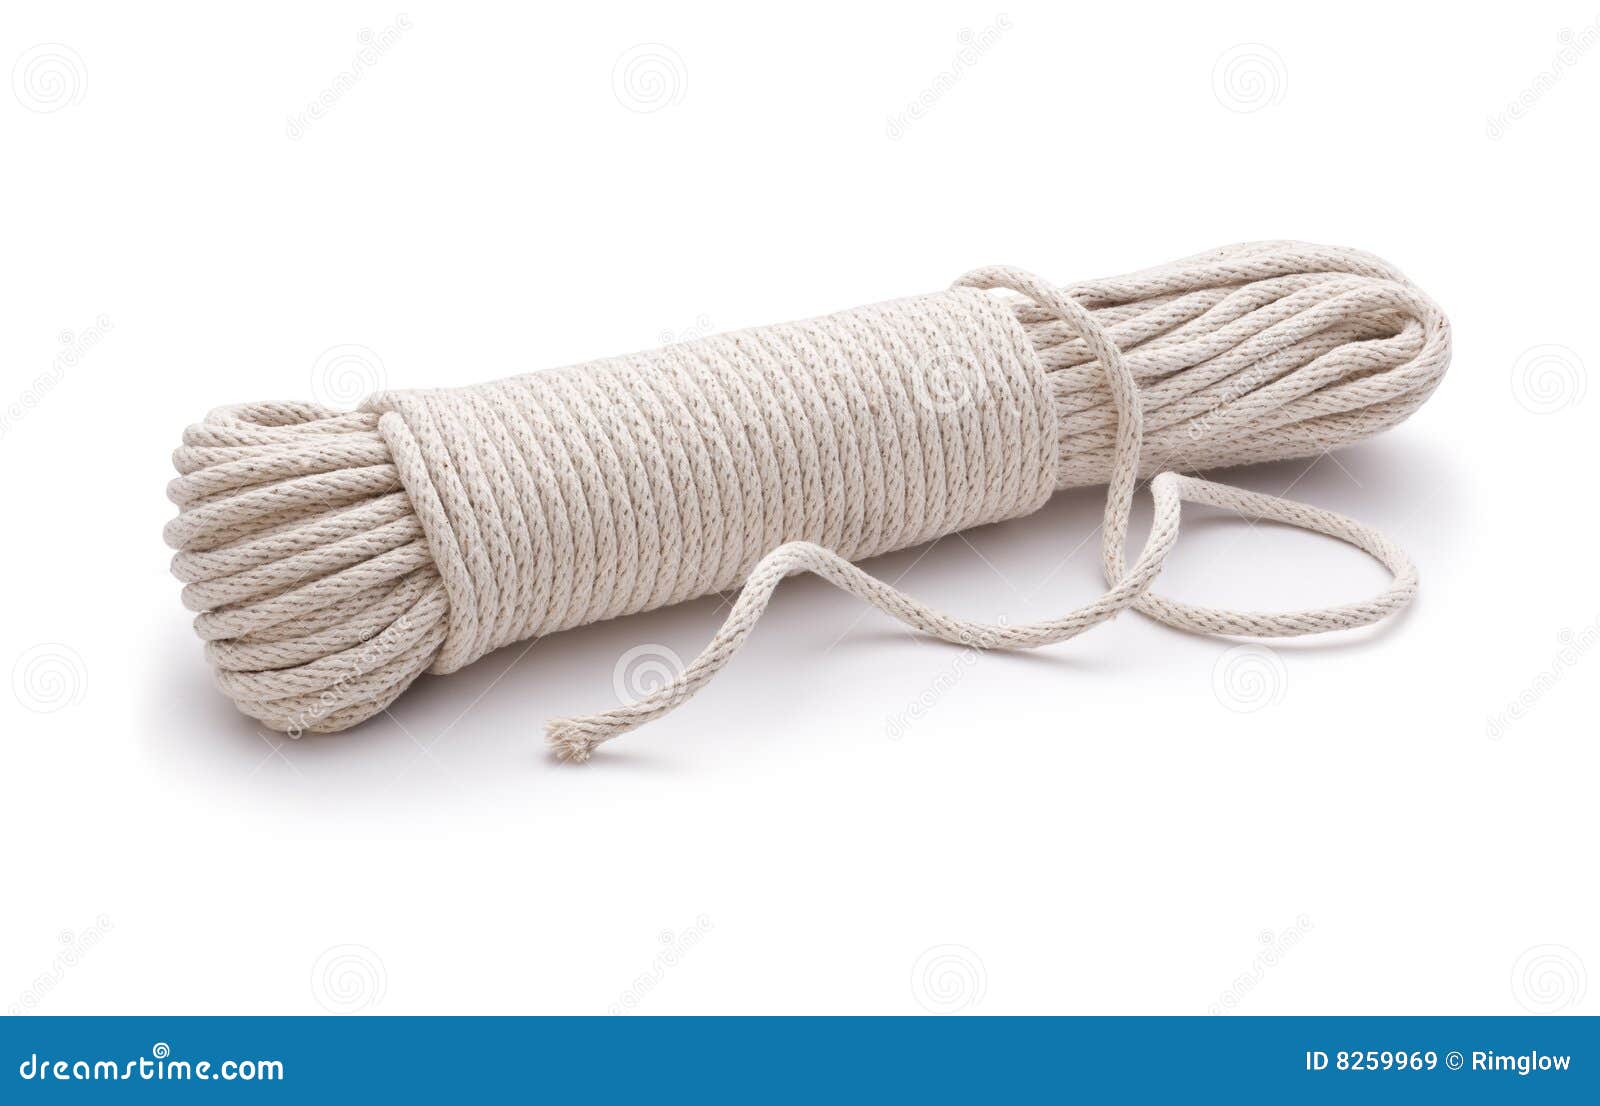 Rope Cord Unravelled stock image. Image of unravel, untie - 8259969